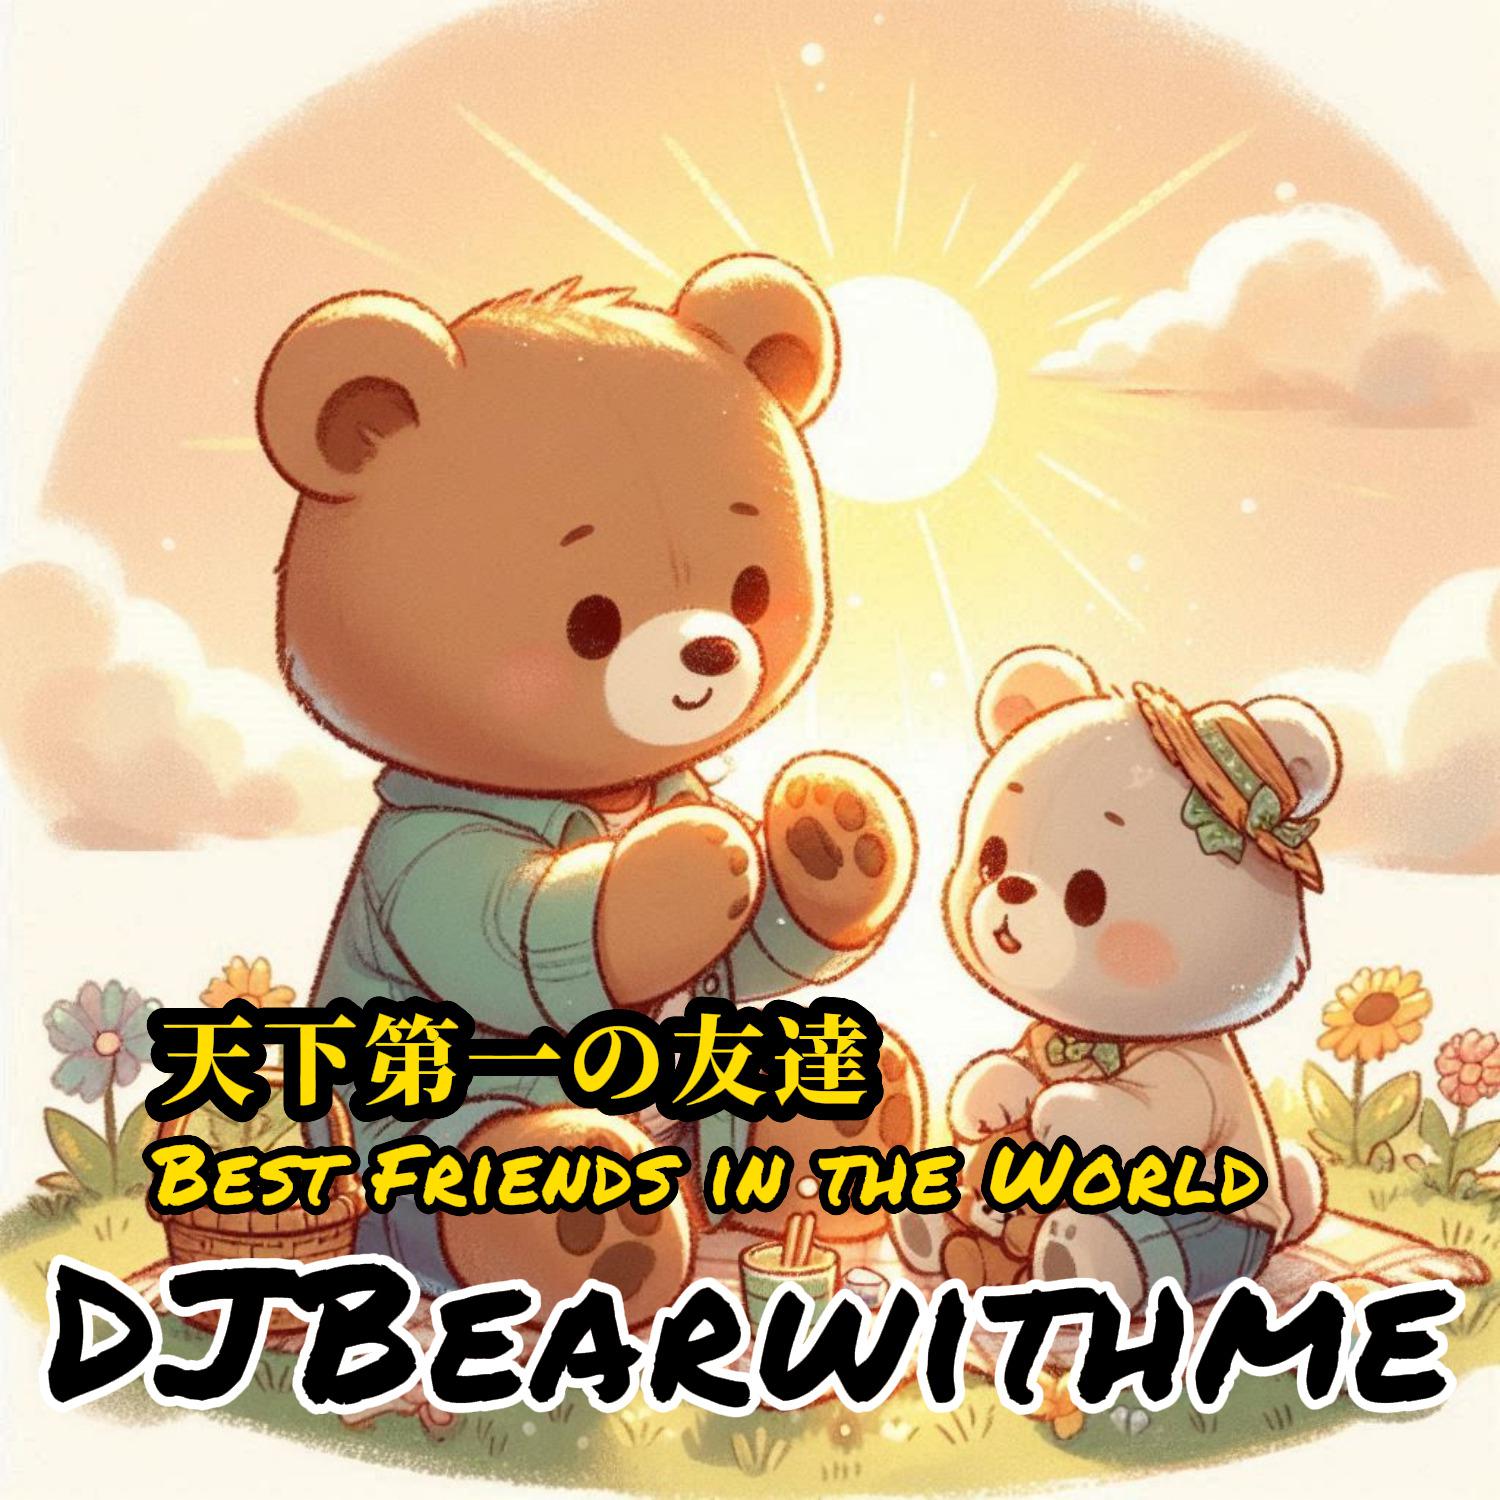 DJBearwithme - 天下第一の友達 The Best Friends in the World (live) 伴奏